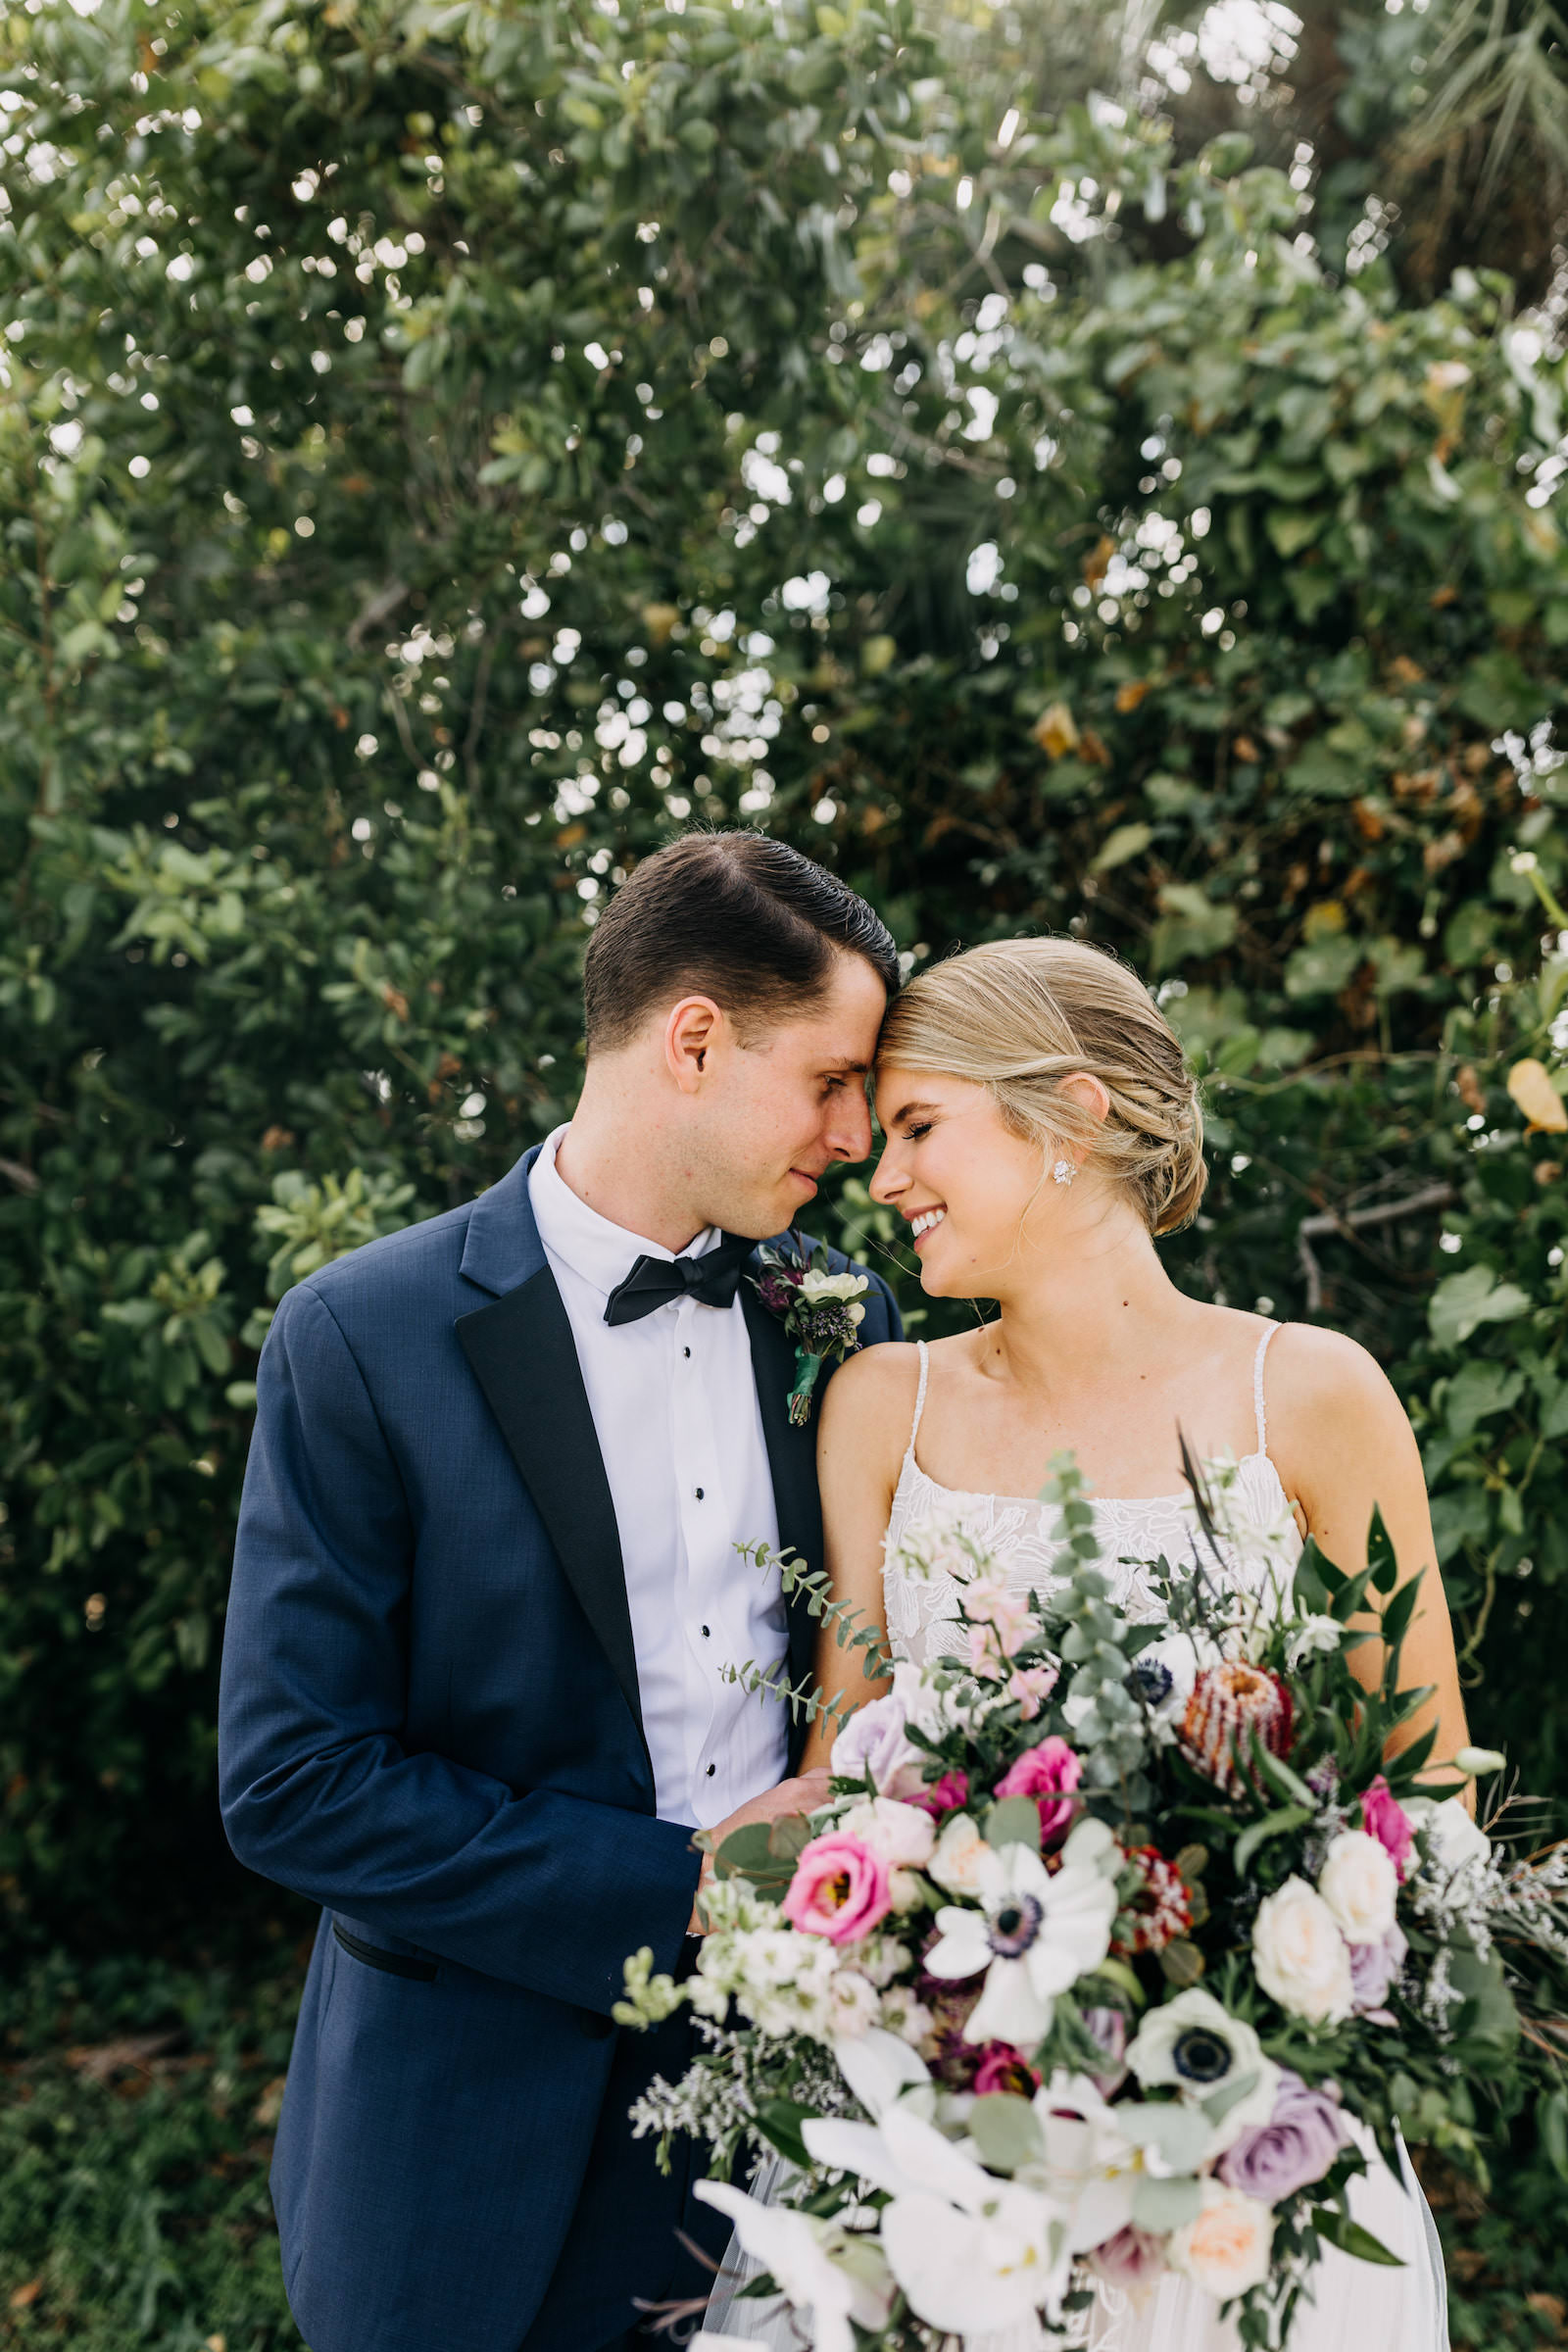 Florida Bride and Groom Wedding Portrait with Lush White Anemone, Pink and Lilac Roses and Greenery Floral Bouquet | Tampa Bay Wedding Photographer Amber McWhorter Photography | Wedding Florist Leaf It To Us